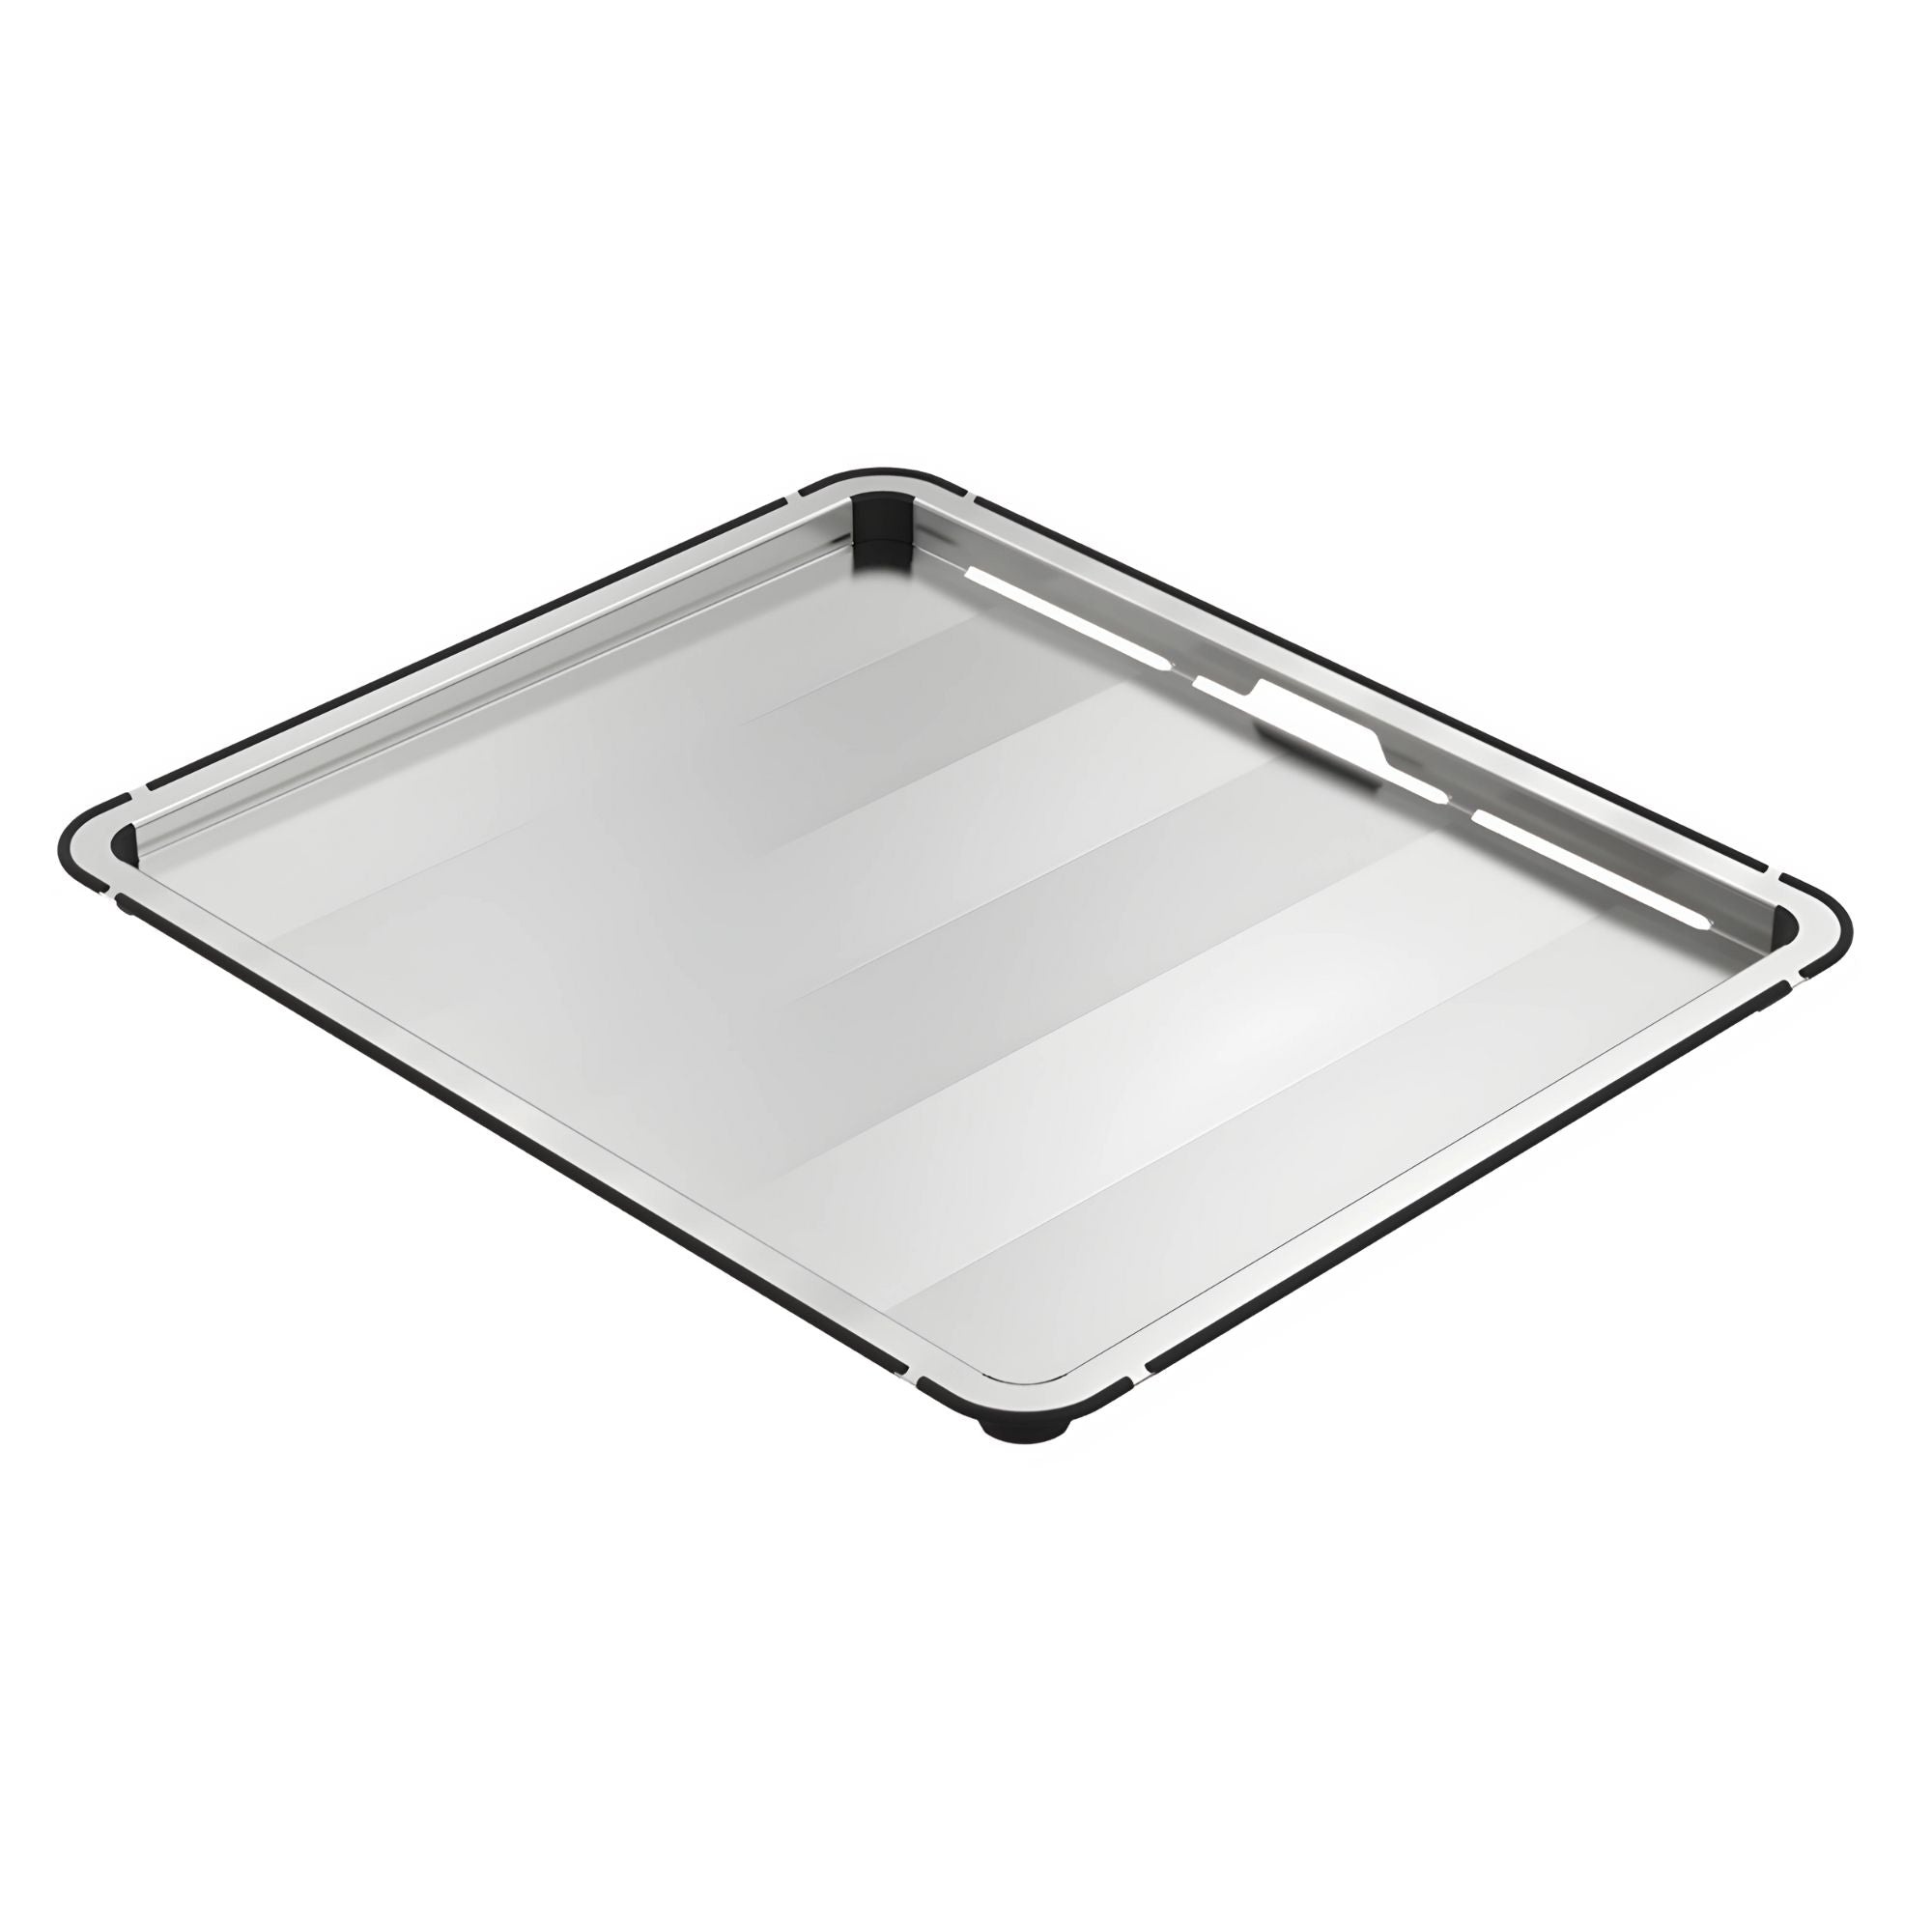 ABEY LUCIA DOUBLE BOWL KITCHEN SINK STAINLESS STEEL 724MM